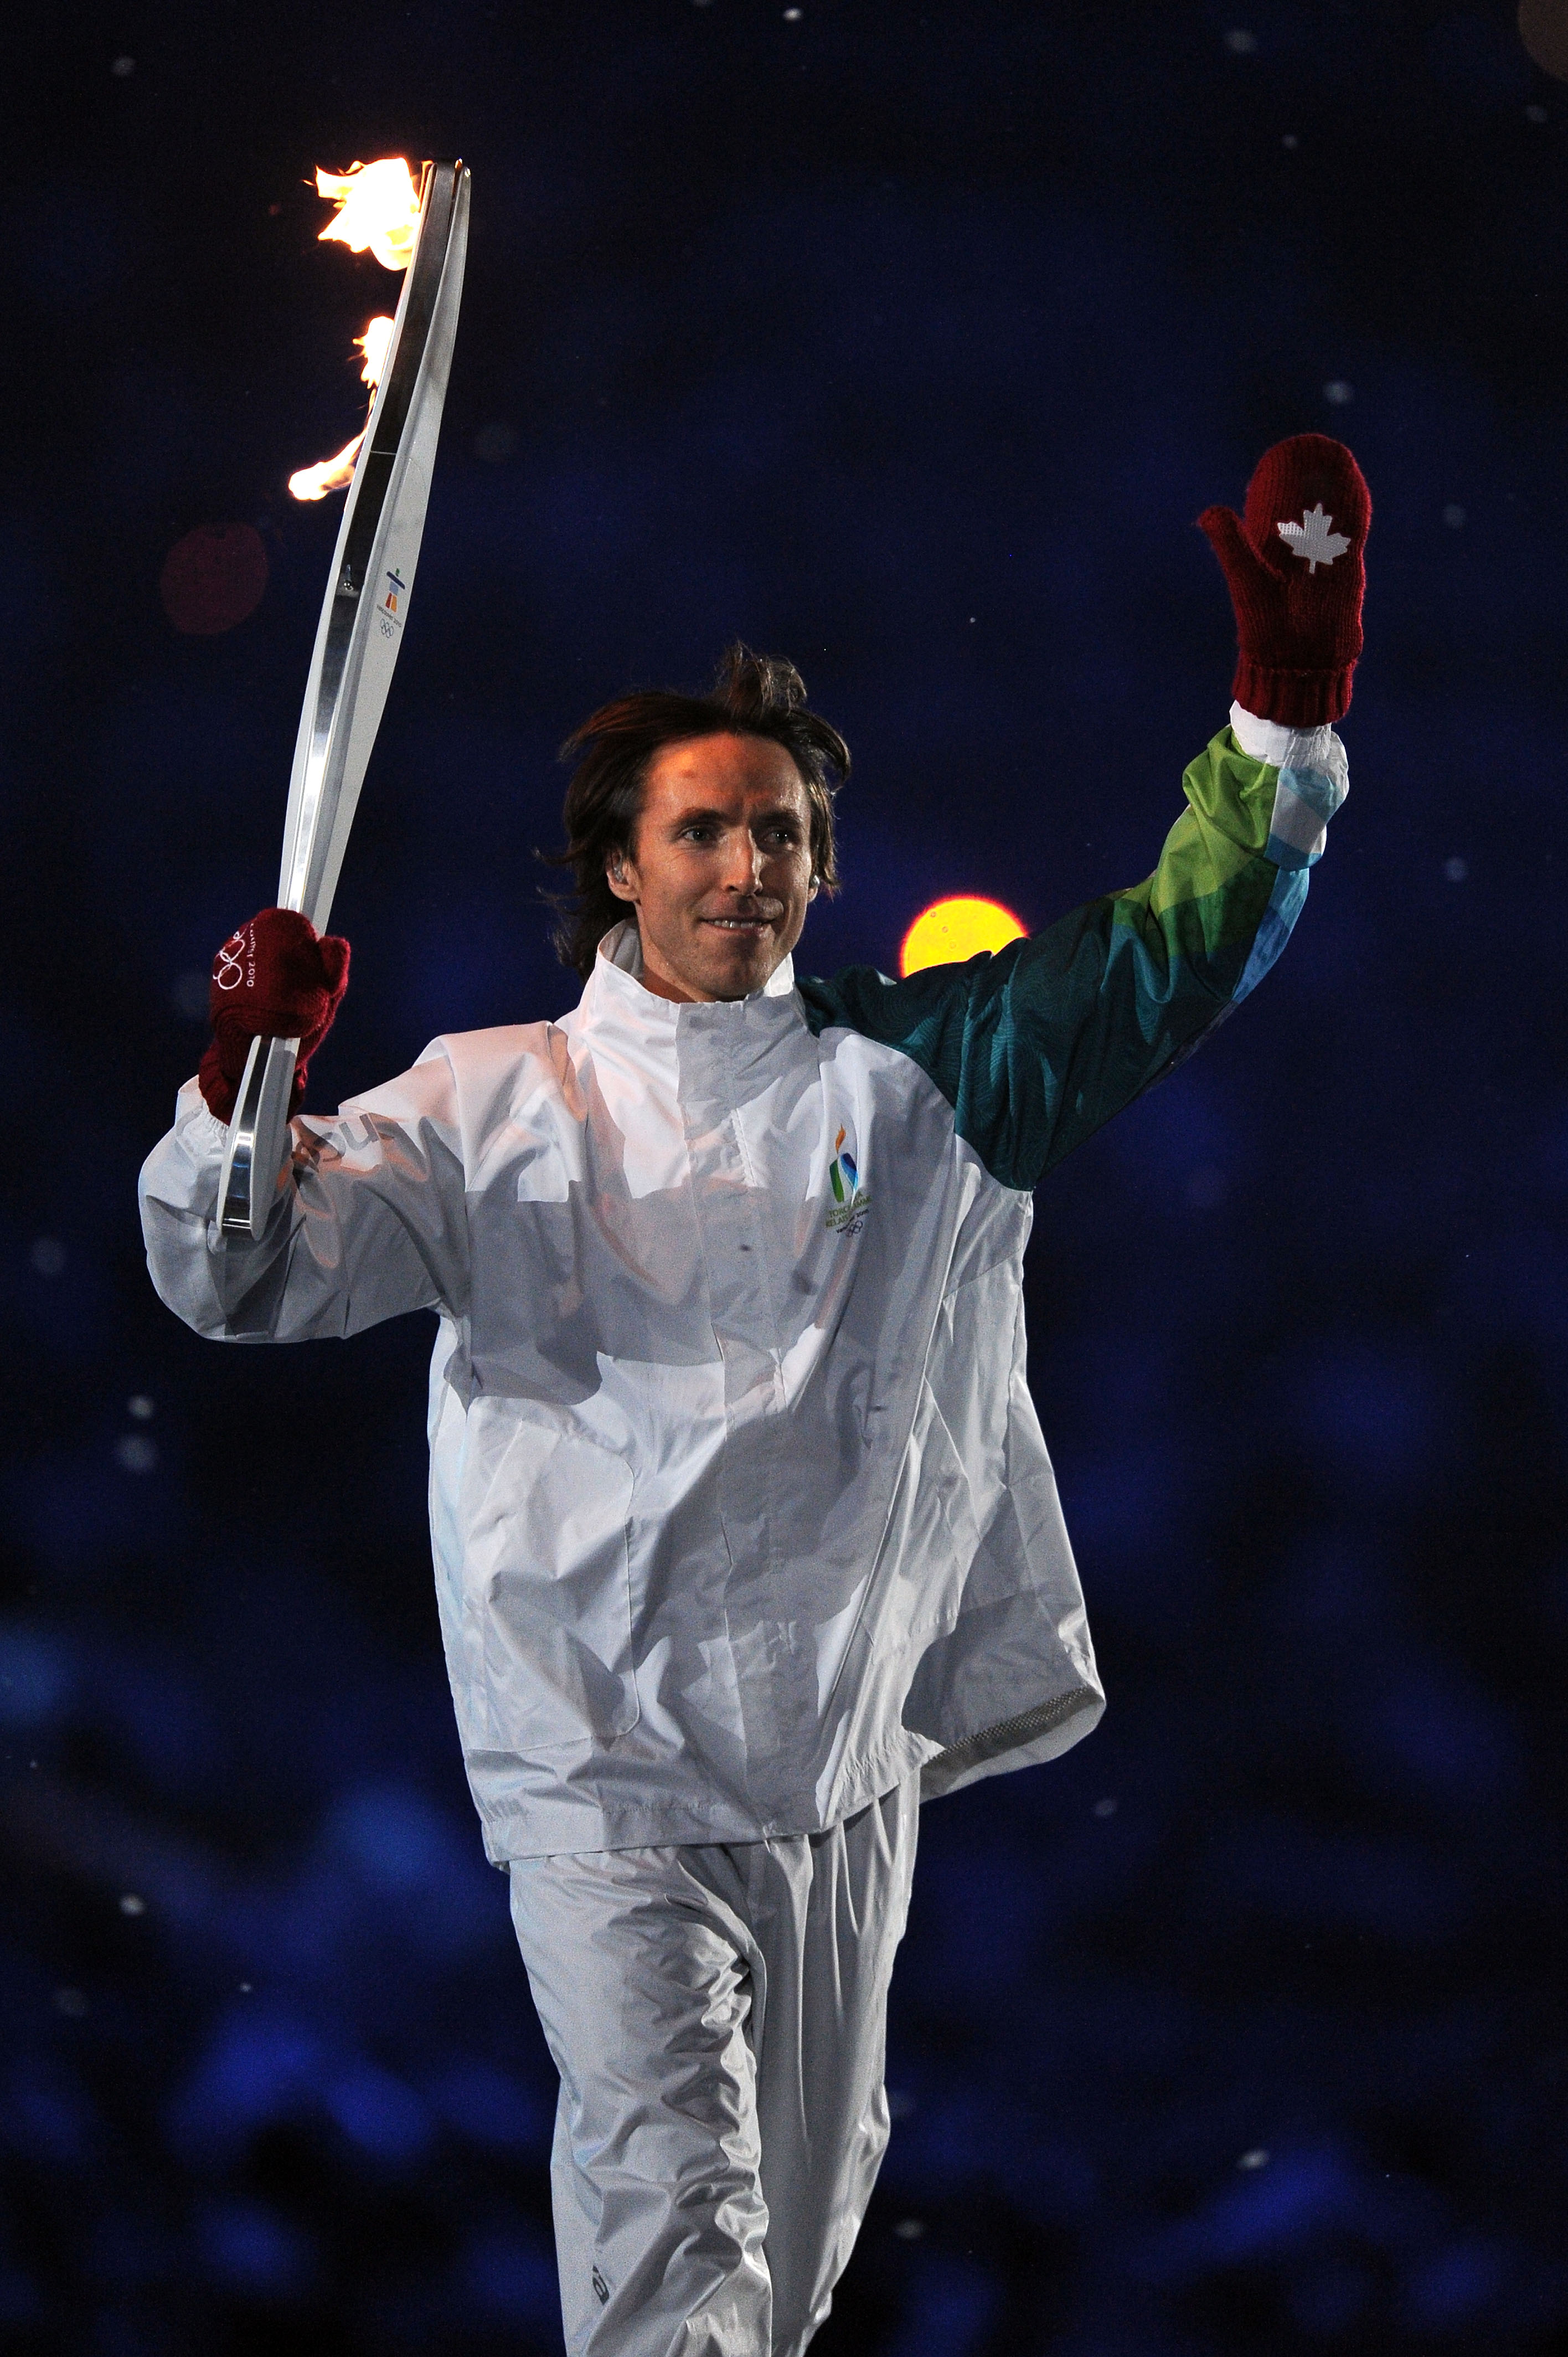 VANCOUVER, BC - FEBRUARY 12:  Steve Nash carries the Olympic flame during the Opening Ceremony of the 2010 Vancouver Winter Olympics at BC Place on February 12, 2010 in Vancouver, Canada.  (Photo by Jasper Juinen/Getty Images)